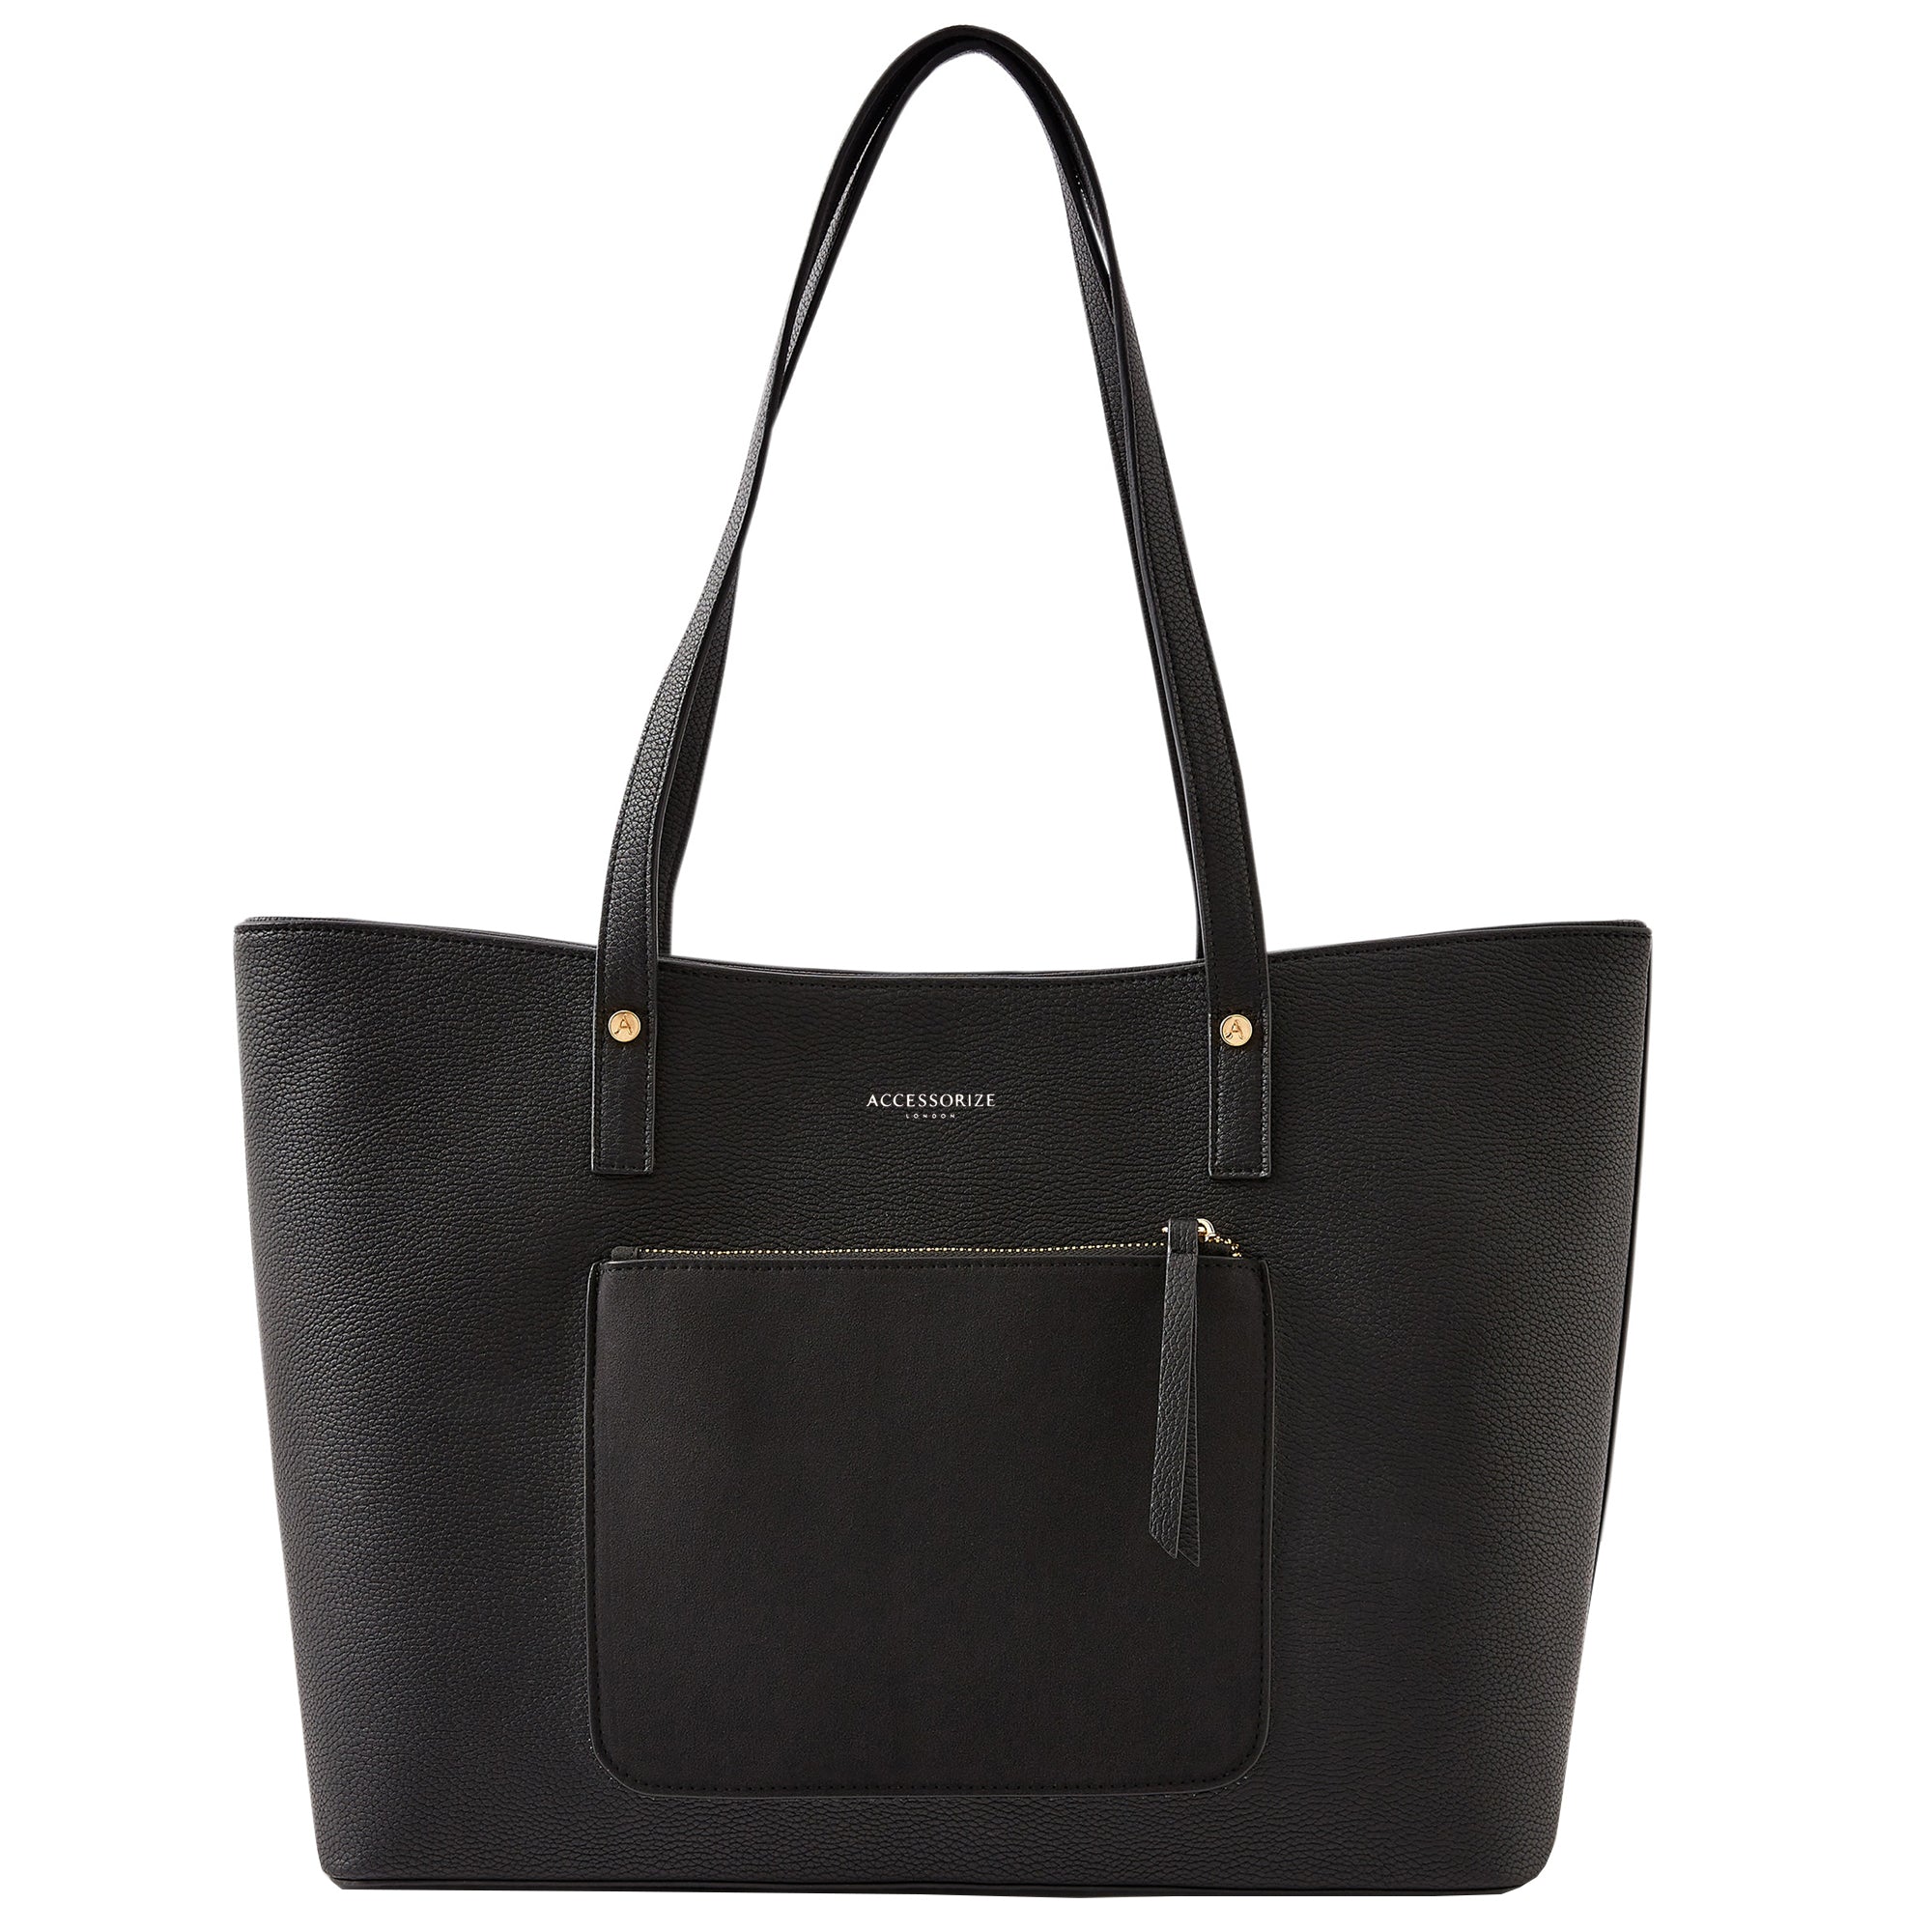 Buy Black Eleanor Tote Bag Online At Best Price - Accessorize India